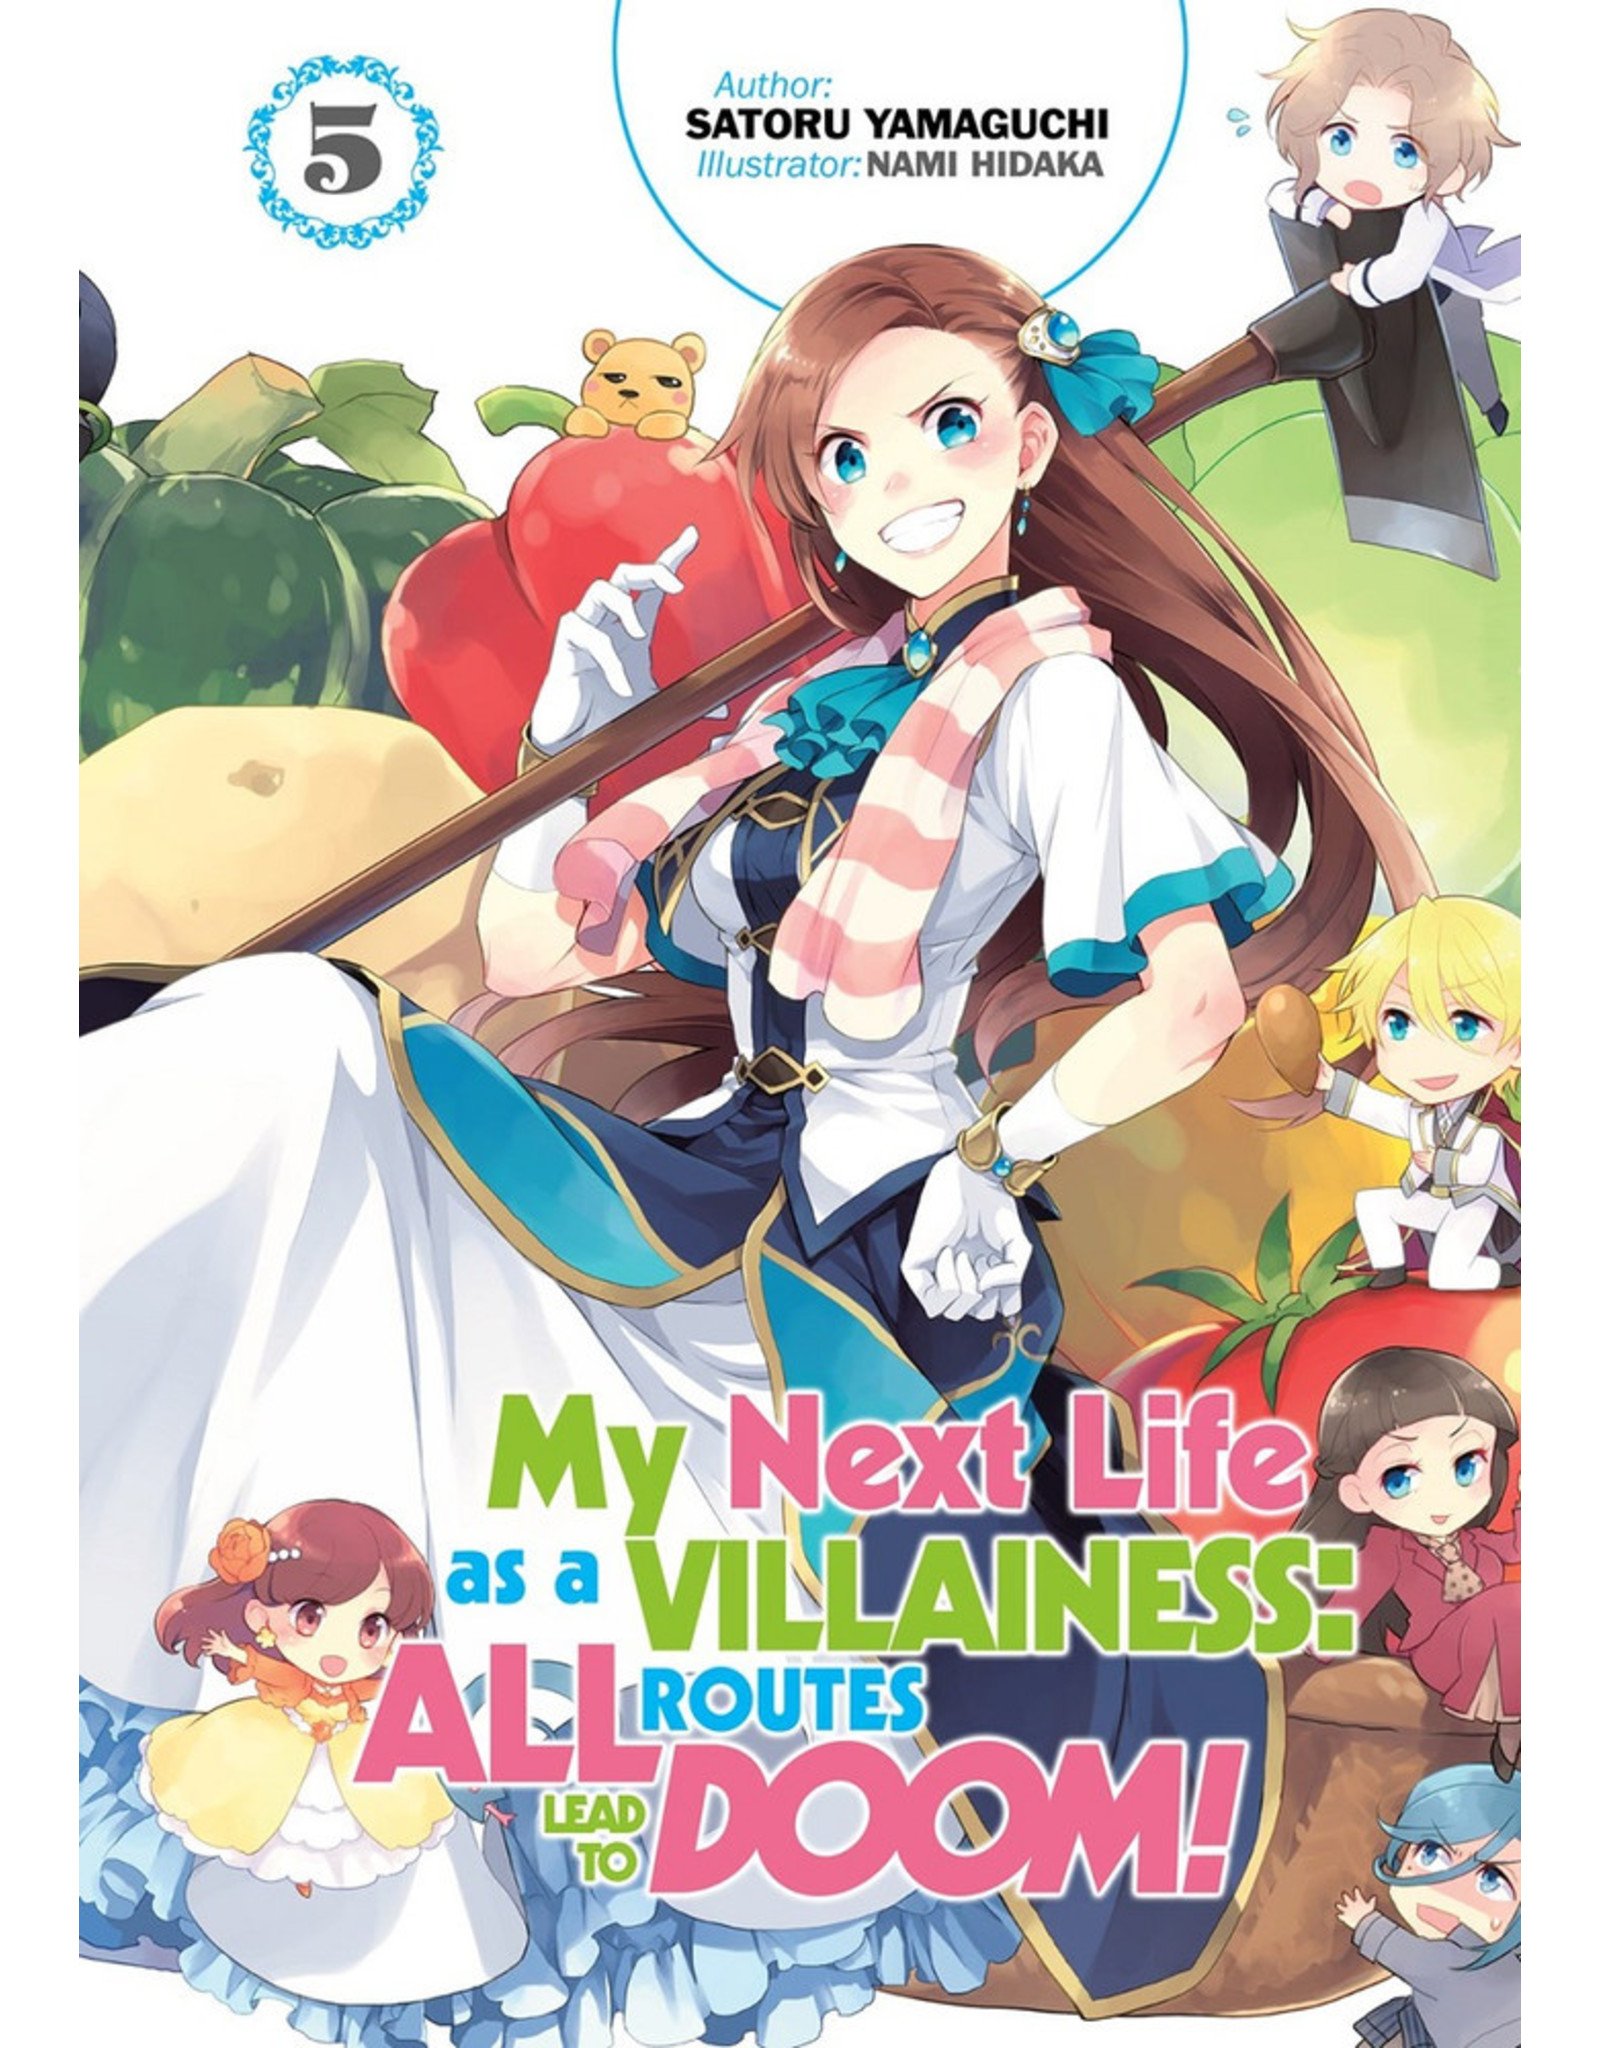 My Next Life As a Villainess: All Routes Lead To Doom! vol. 5 Novel